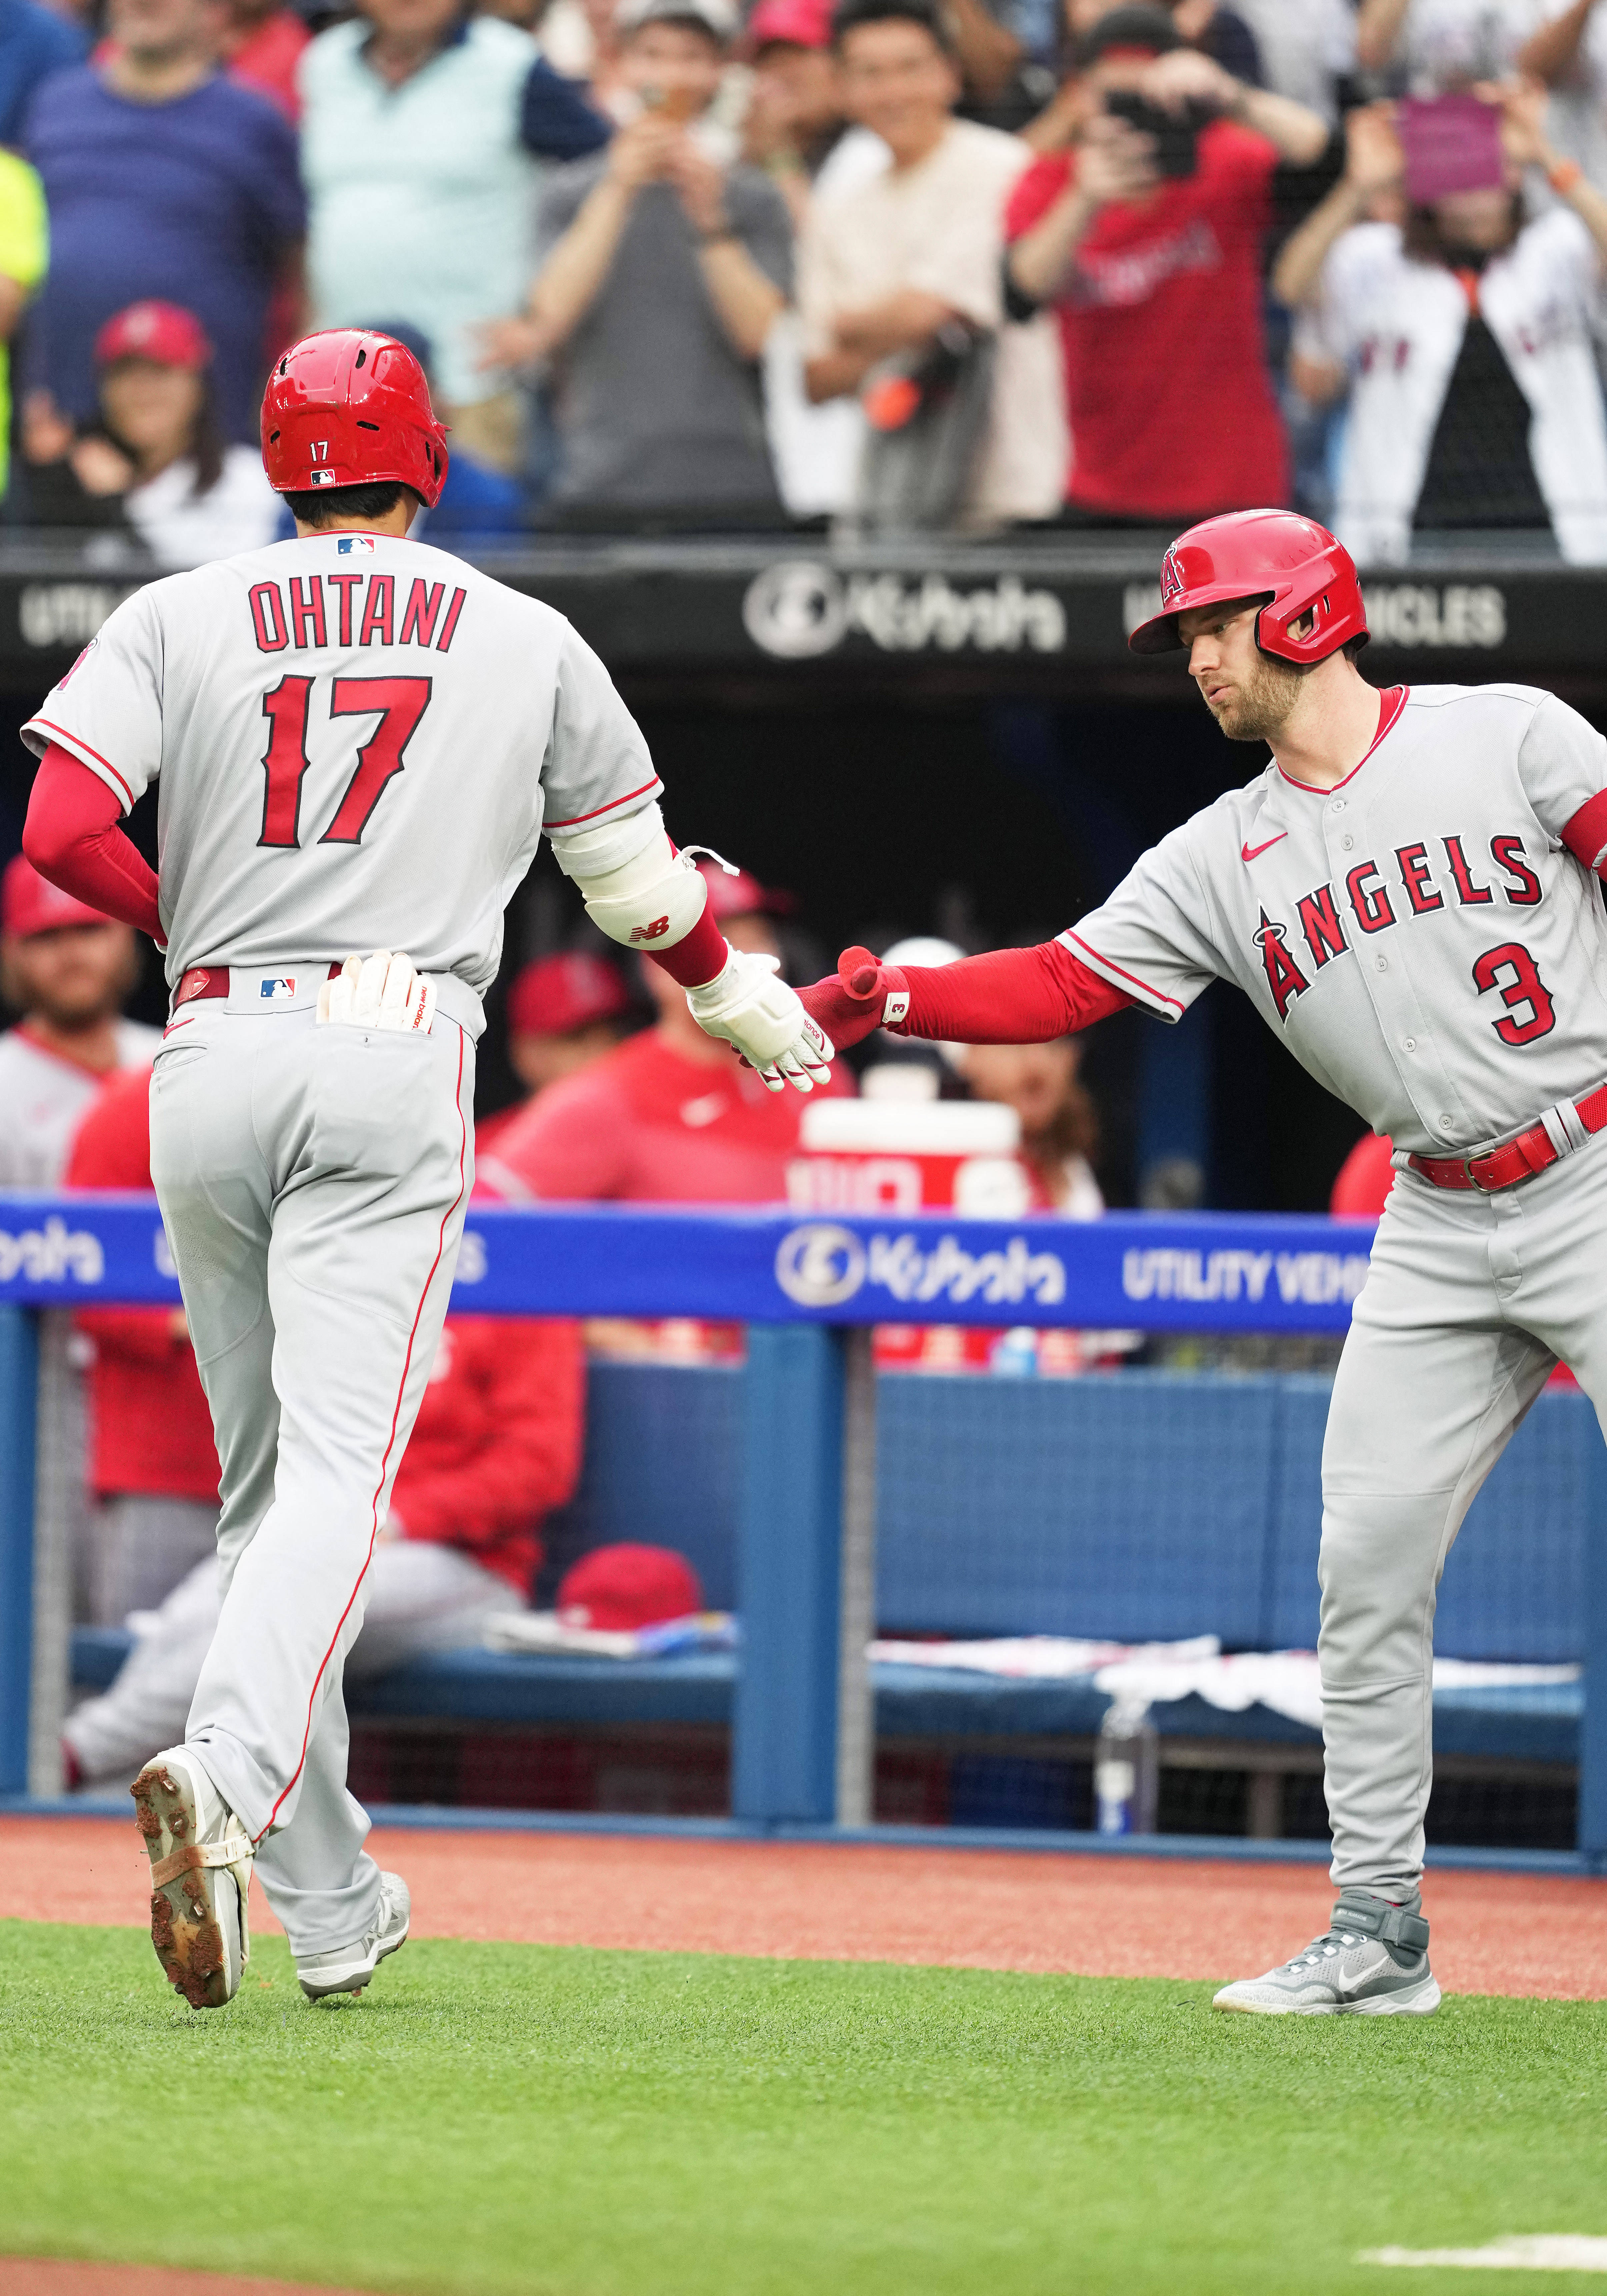 Kirk hits 2 home runs, Espinal also homers as Blue Jays control Ohtani,  beat Angels 6-1 - The San Diego Union-Tribune